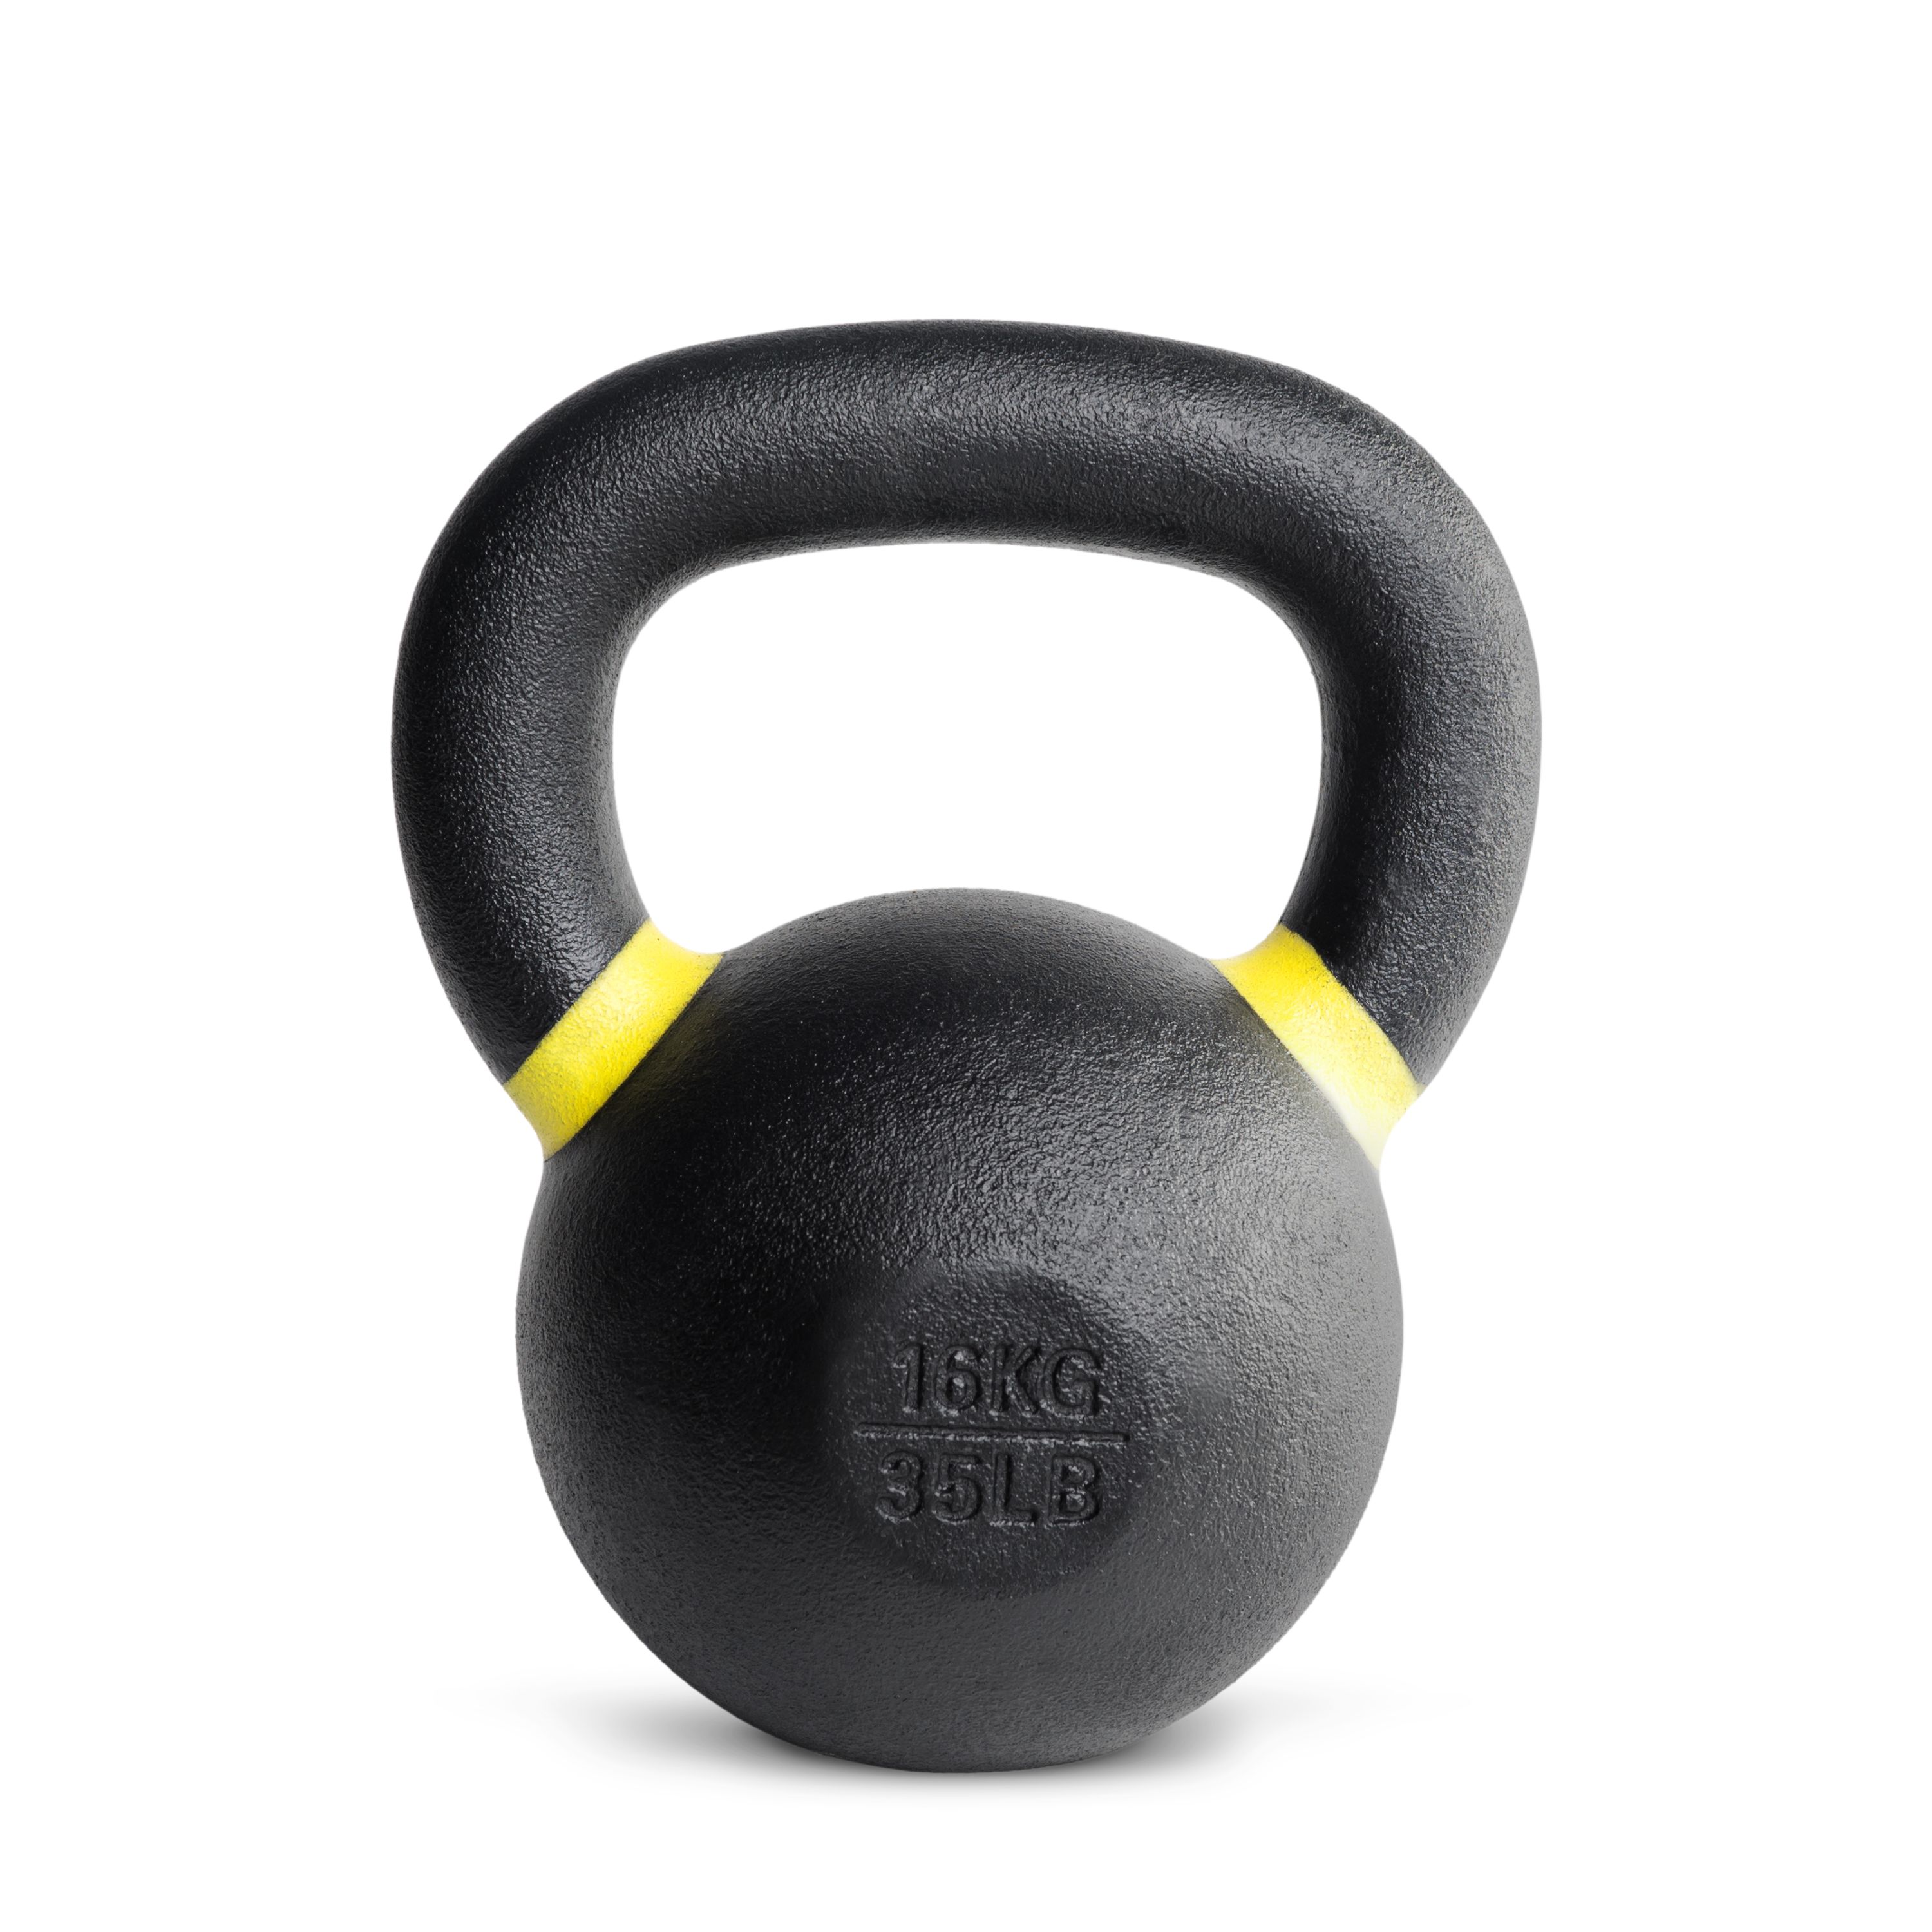 Strength and Core Training for Home Gym with Three-Handles Conditioning RUNWE Kettlebells Weight 5LB 10 LB or 15 LB for Weightlifting